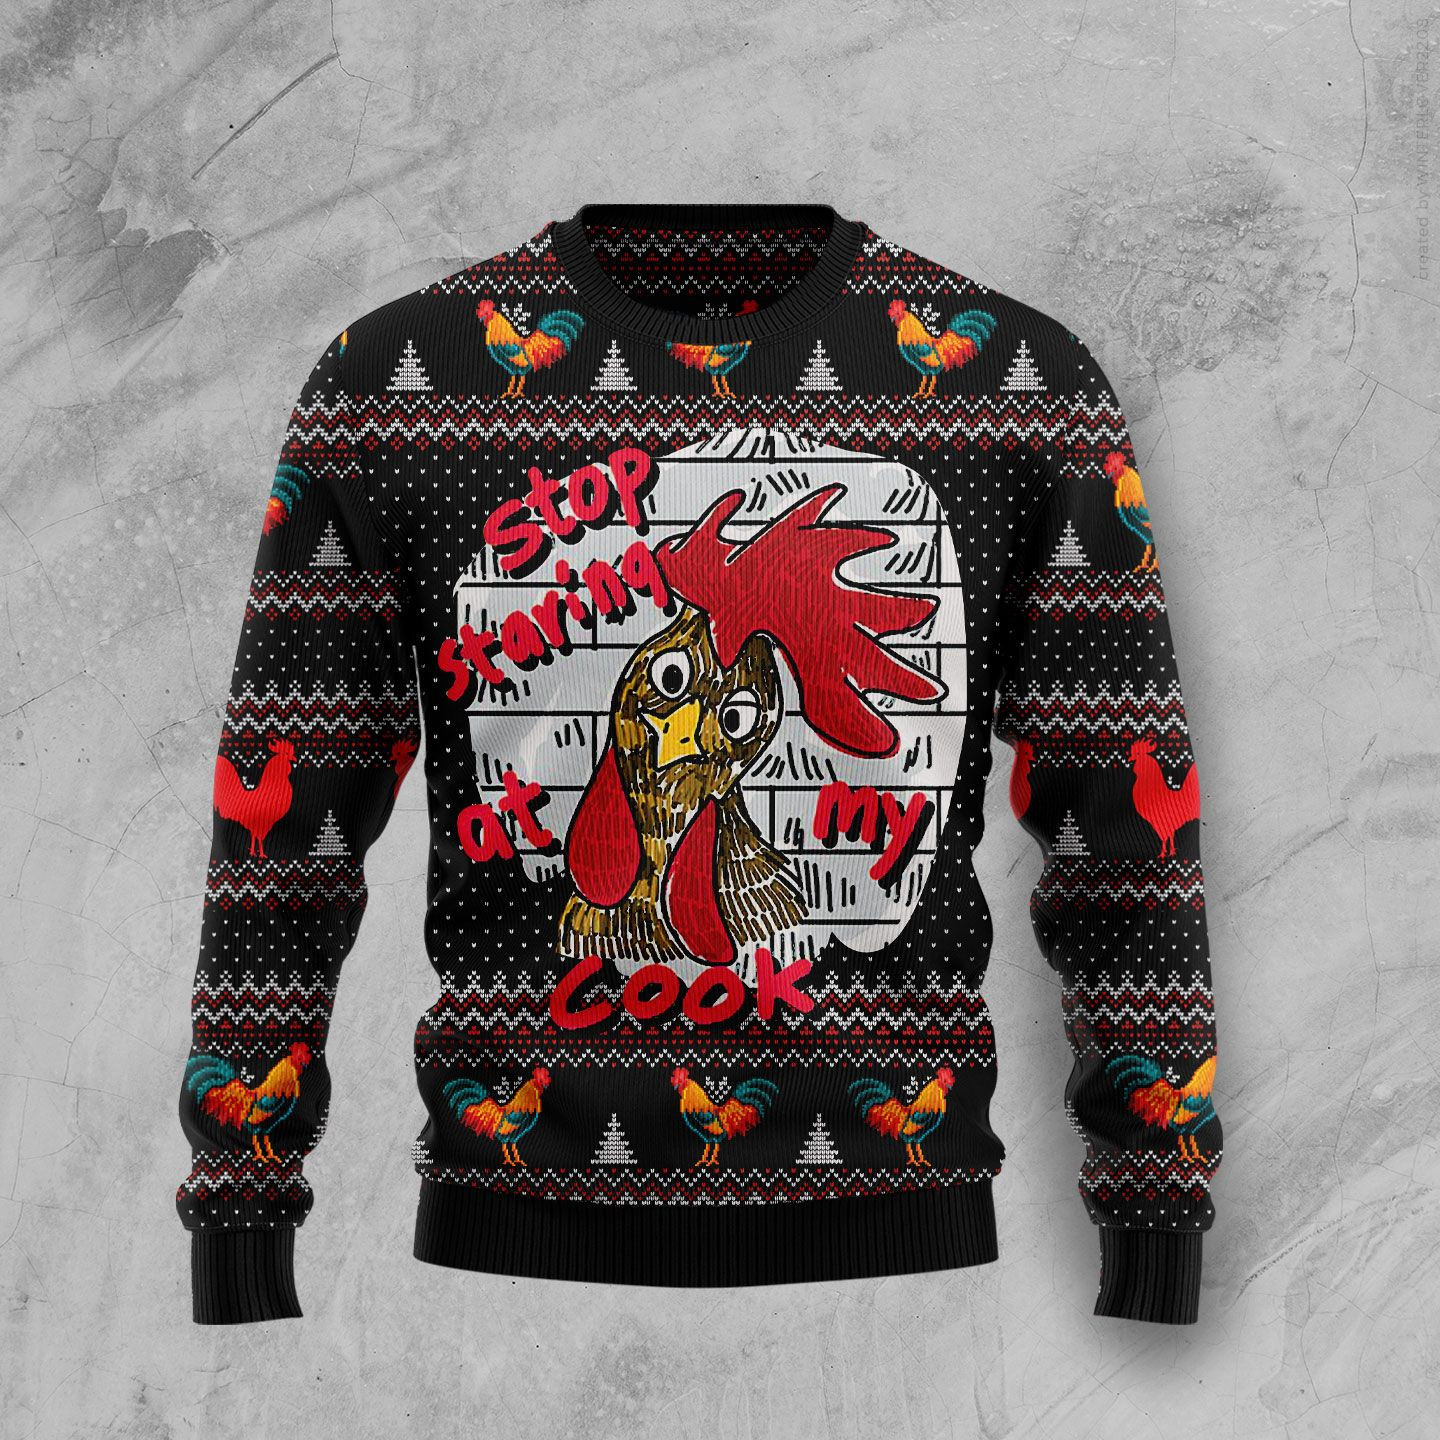 Chicken Stop Staring At My Cock Ugly Christmas Sweater, Ugly Sweater For Men Women, Holiday Sweater